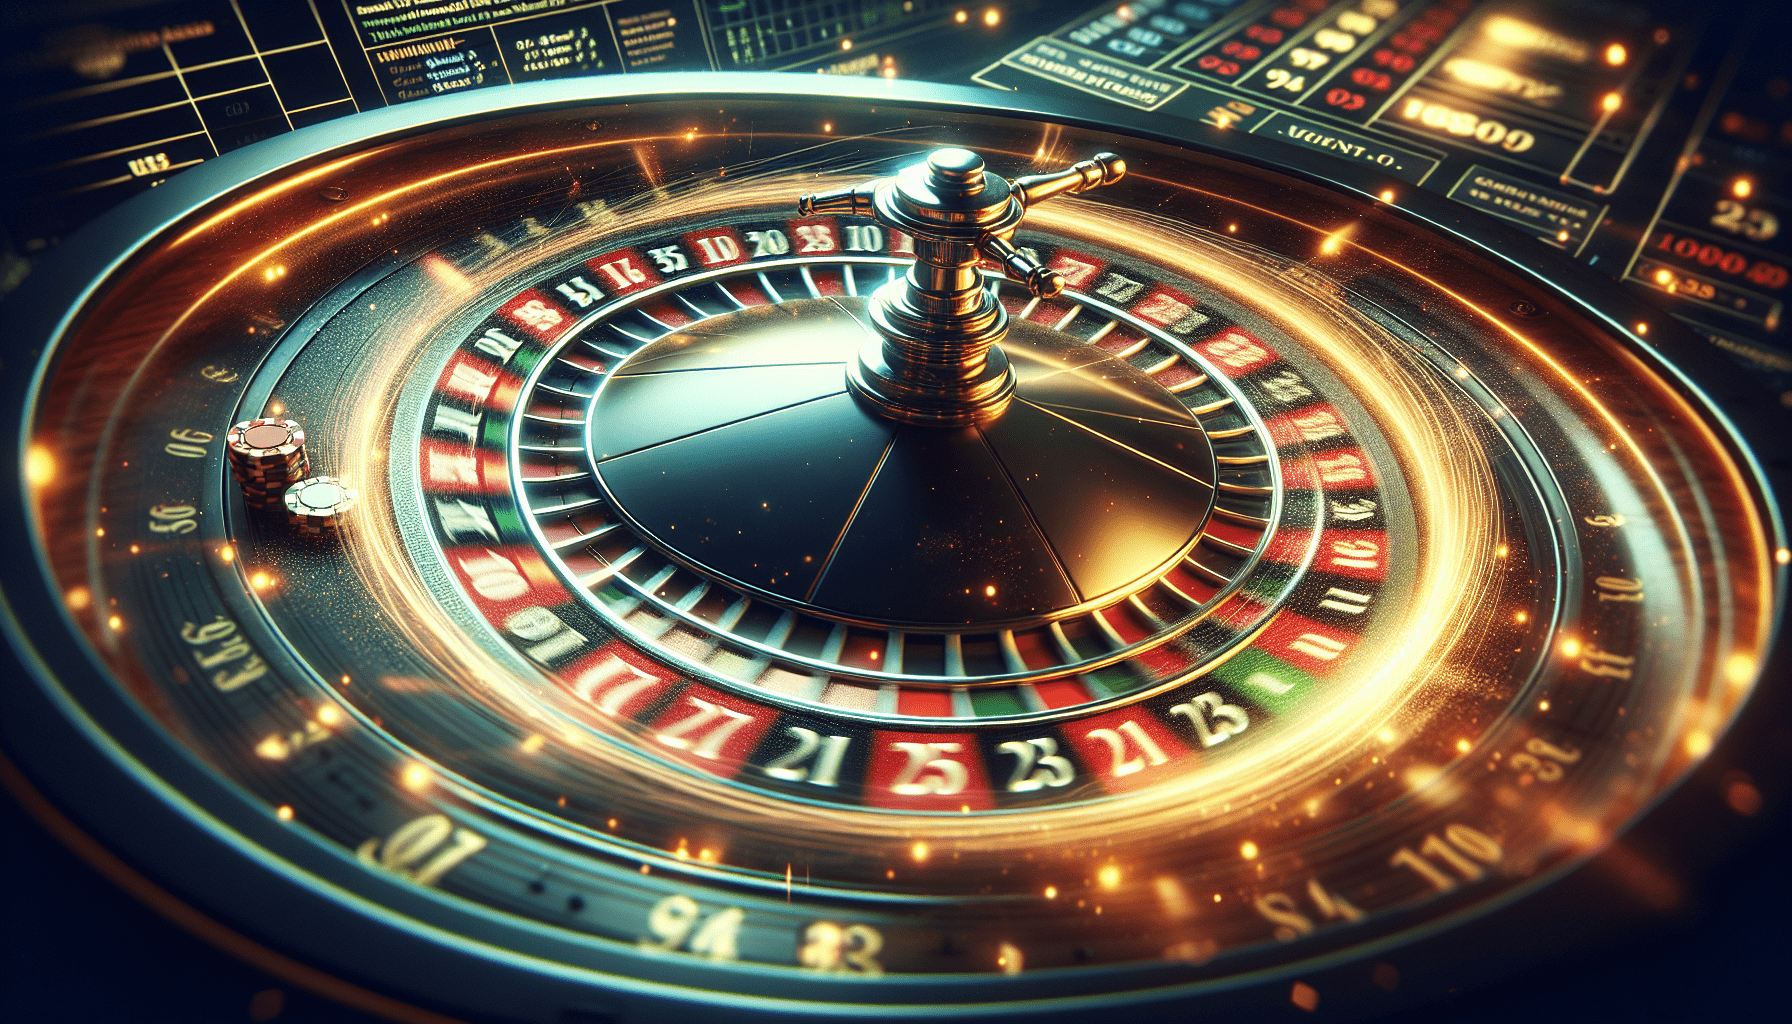 Is Online Casino Roulette Fixed Or Completely Random?